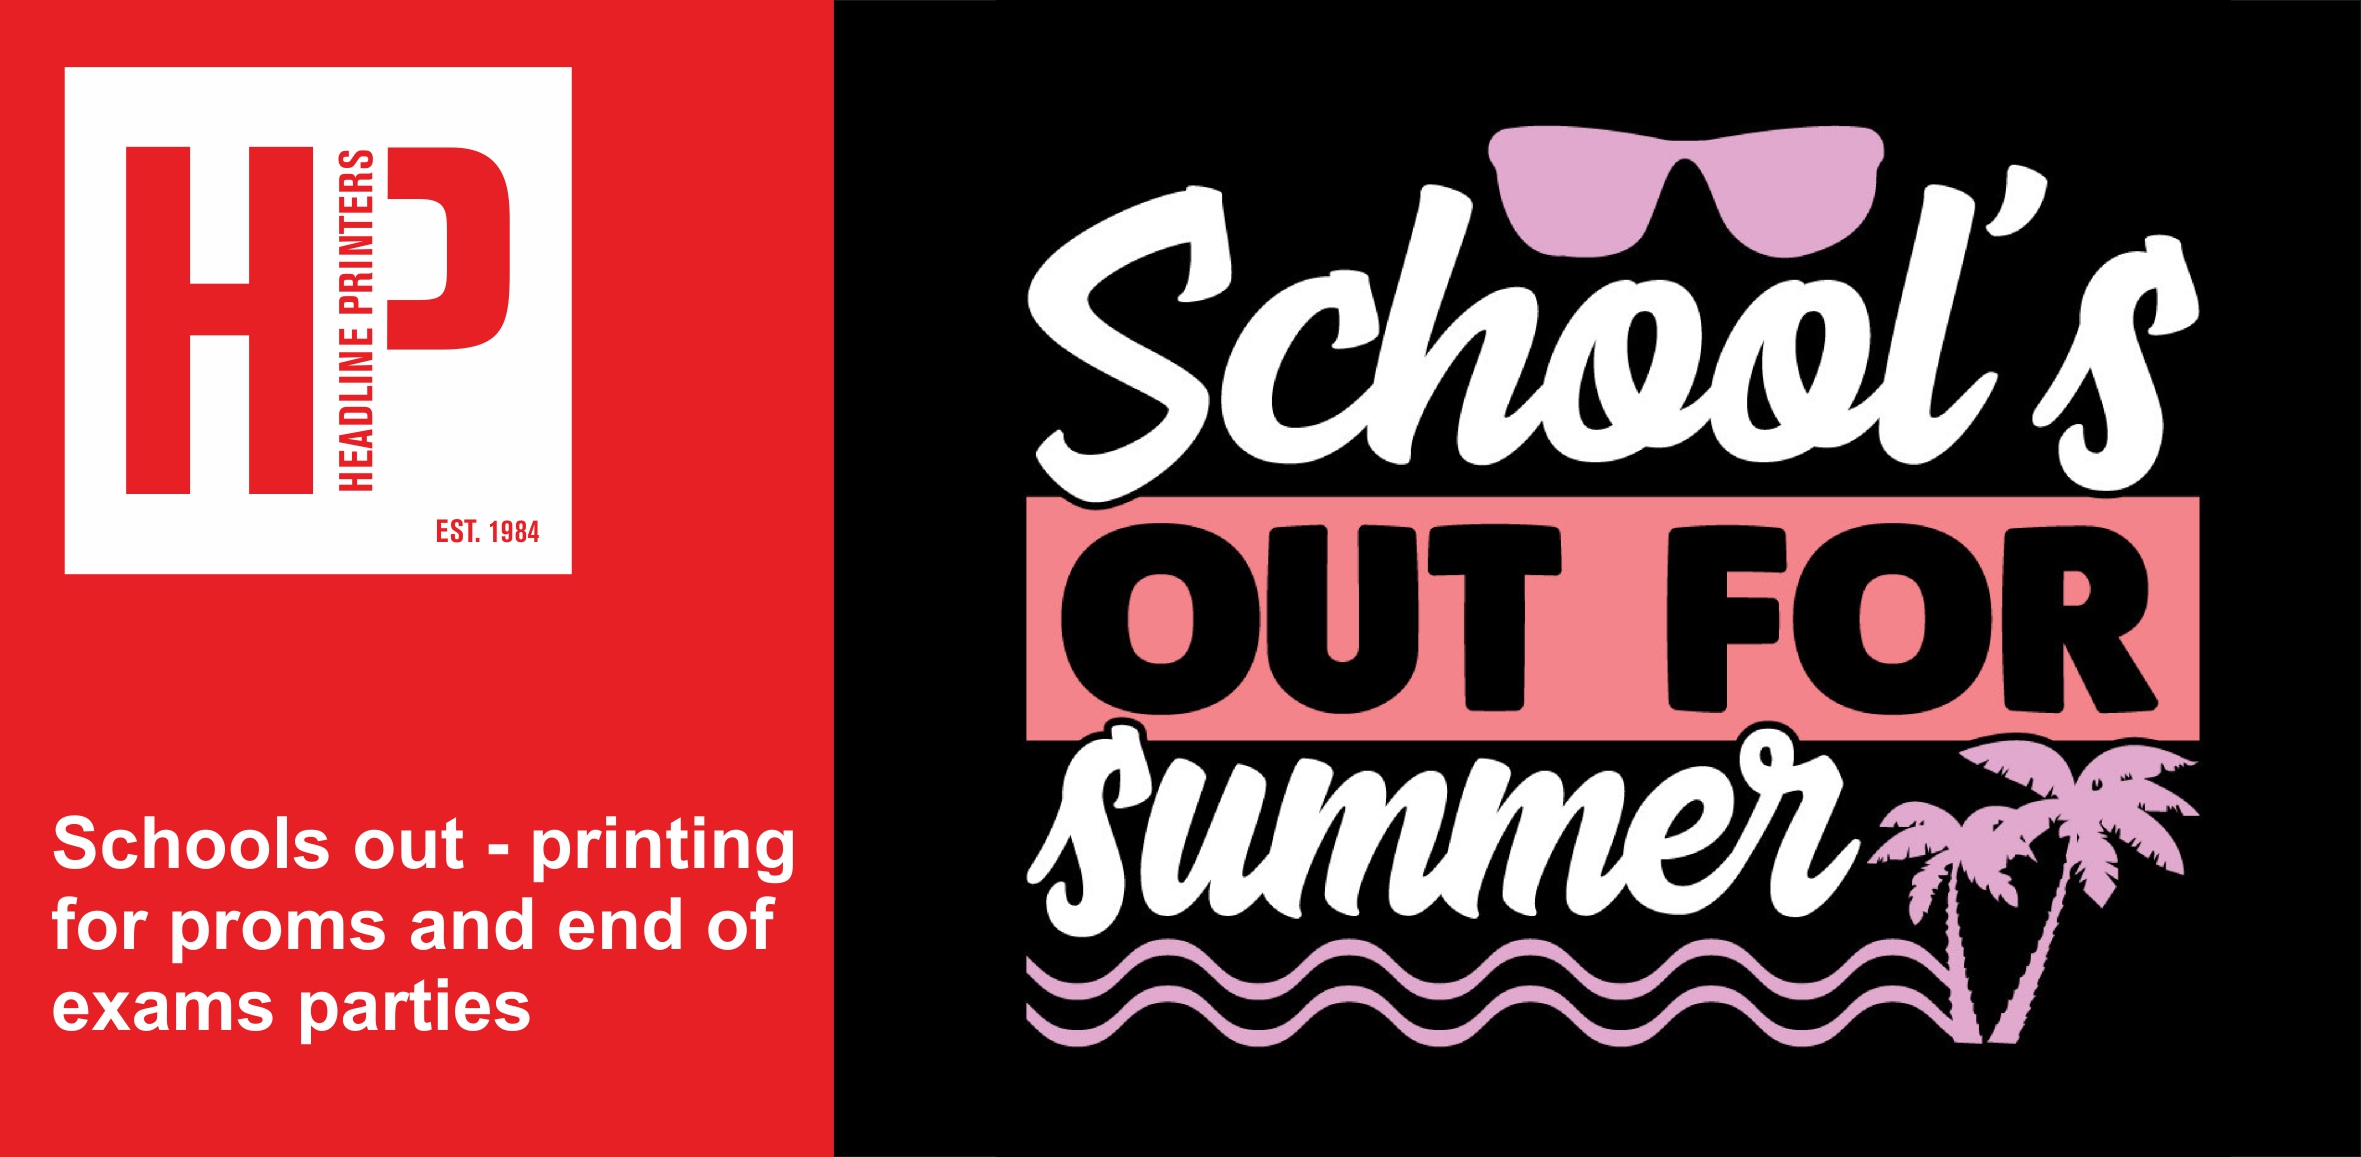 Schools out - printing for proms and end of exams parties